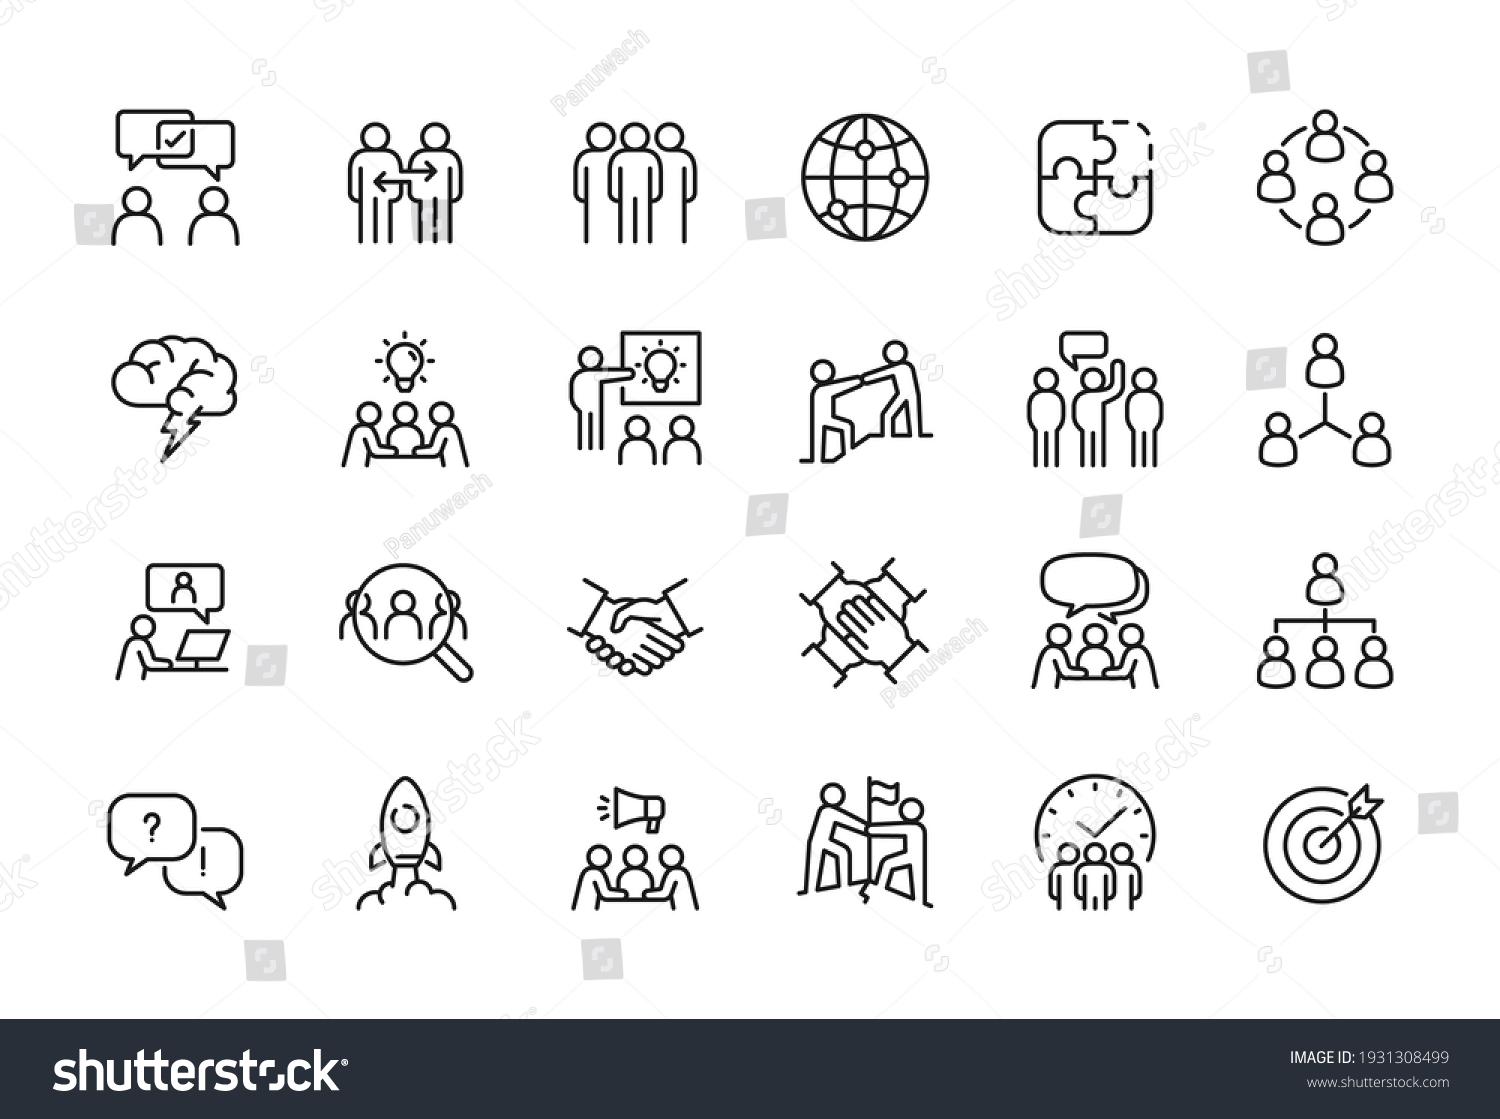 Minimal Teamwork in business management icon set - Editable stroke, Pixel perfect at 64x64 #1931308499